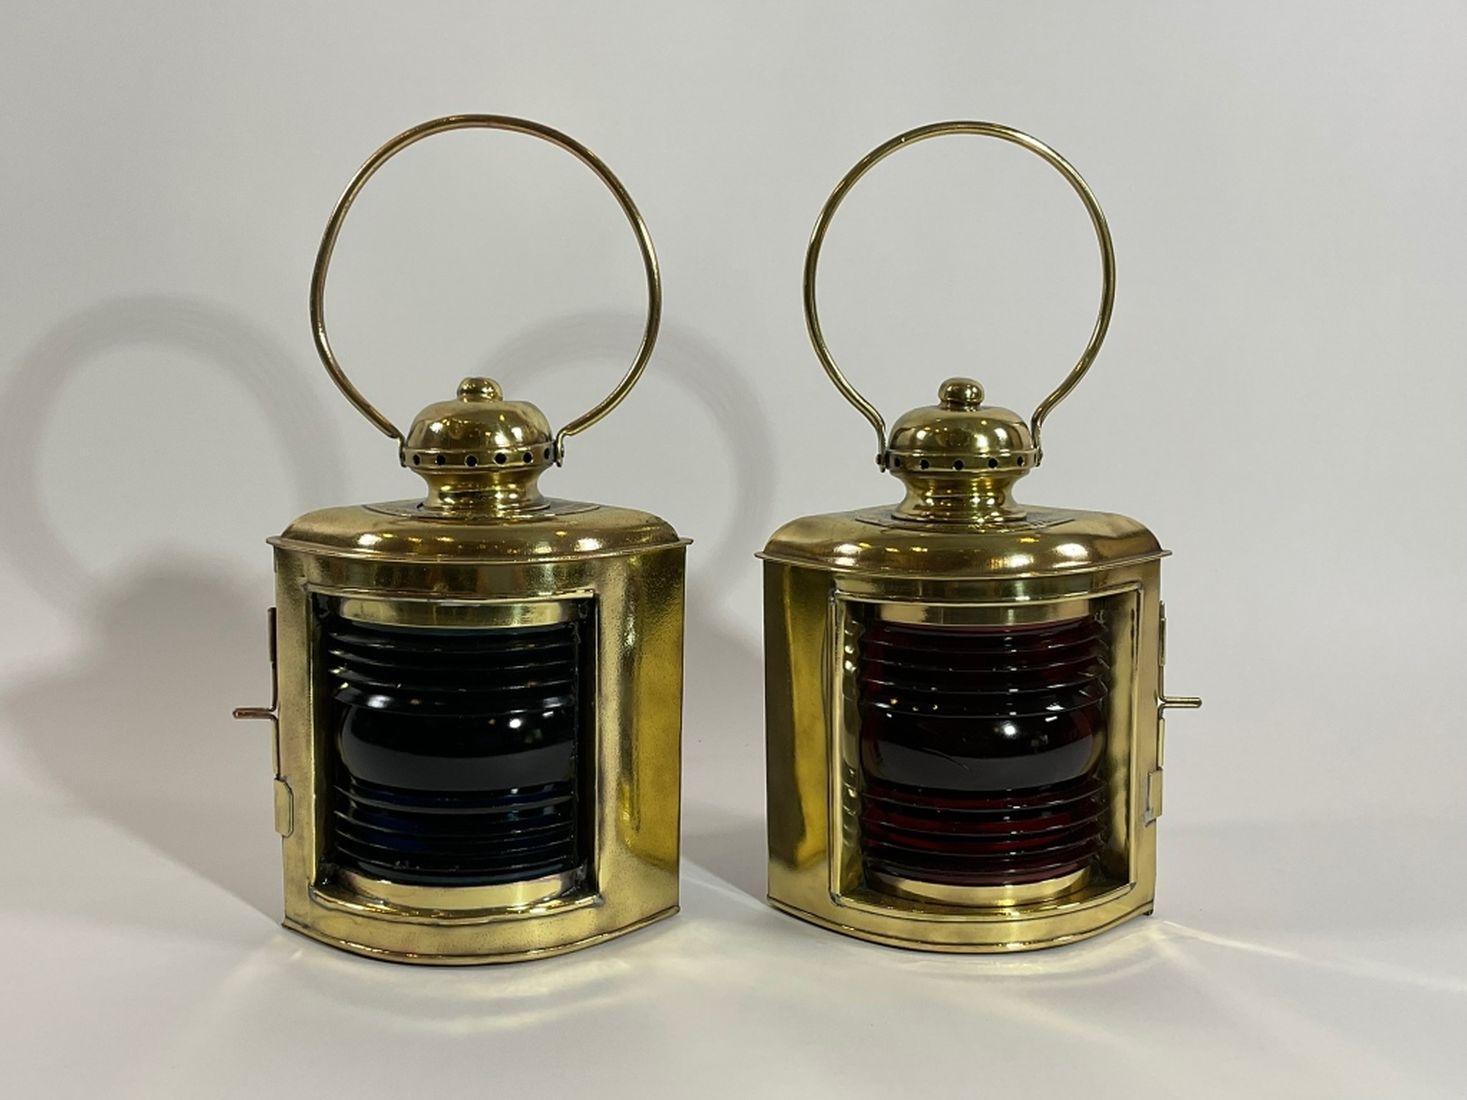 Polished Port and Starboard Yacht Lanterns